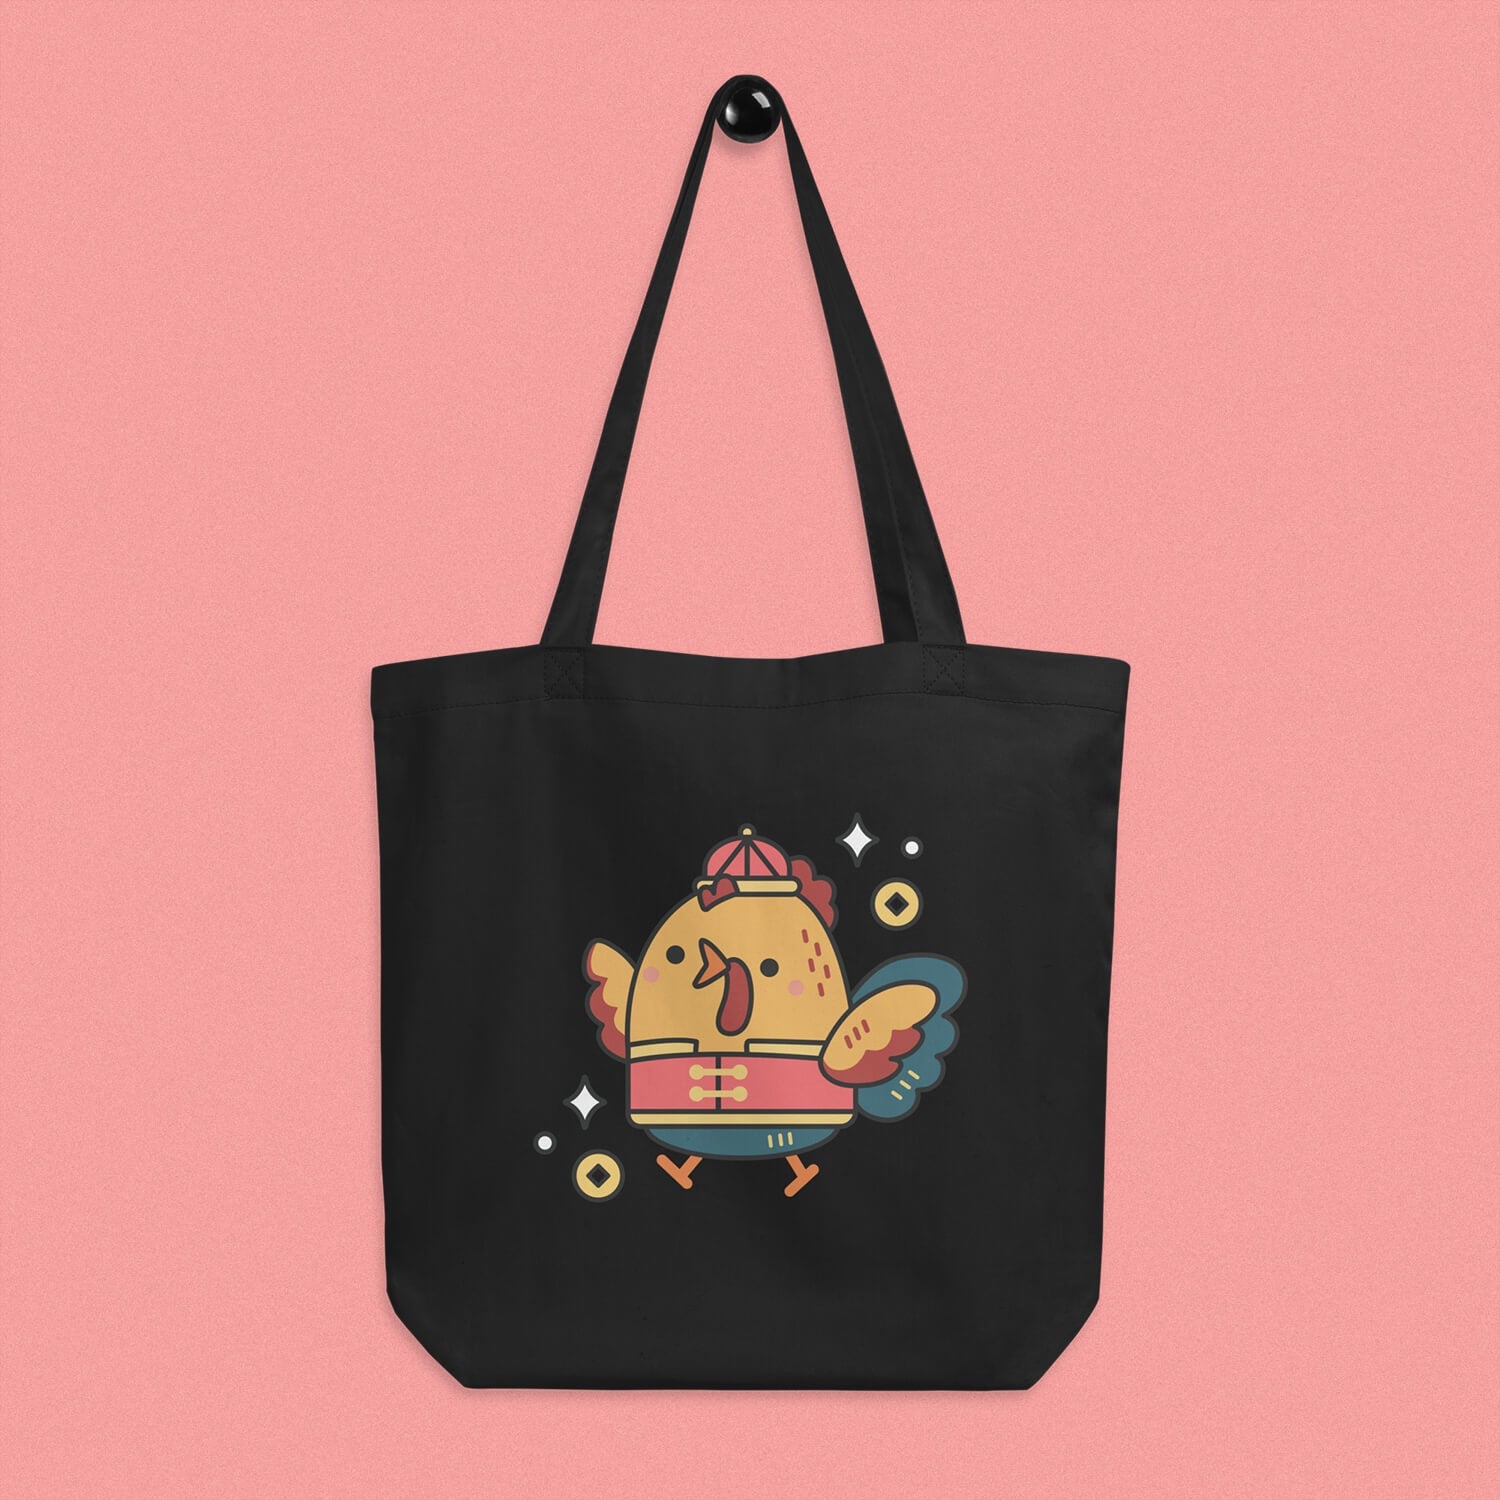 Year of the Rooster Tote Bag - Ni De Mama Chinese Clothing